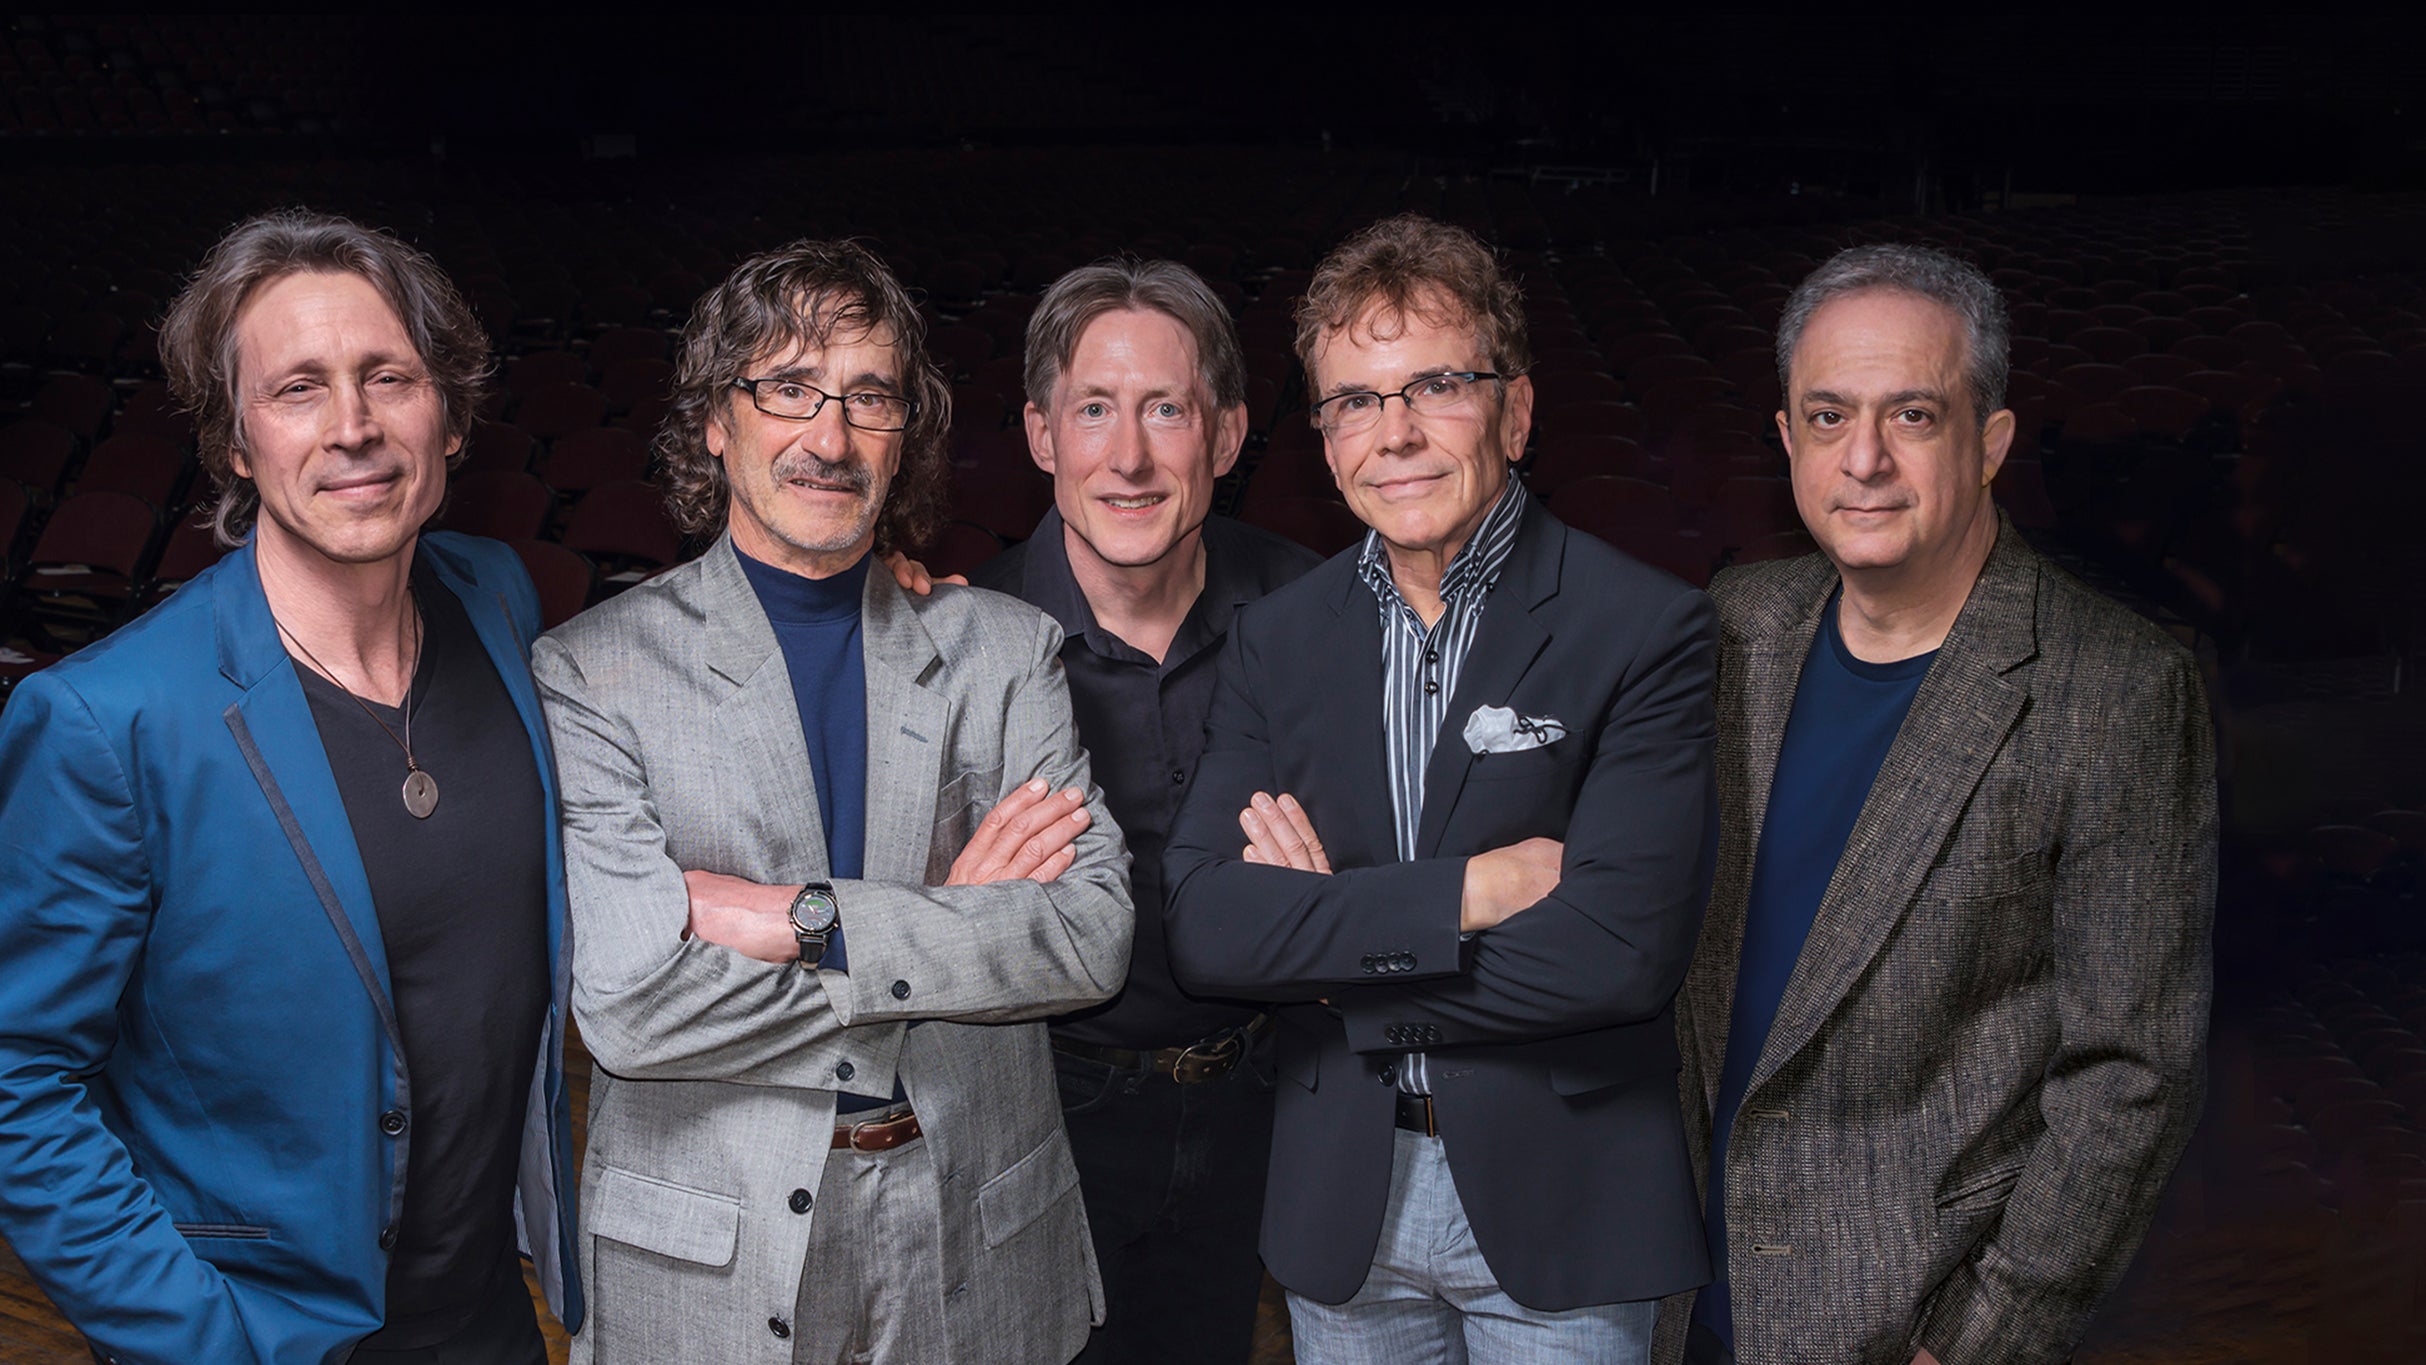 Donnie Iris & the Cruisers in Moon Township promo photo for Official Platinum presale offer code